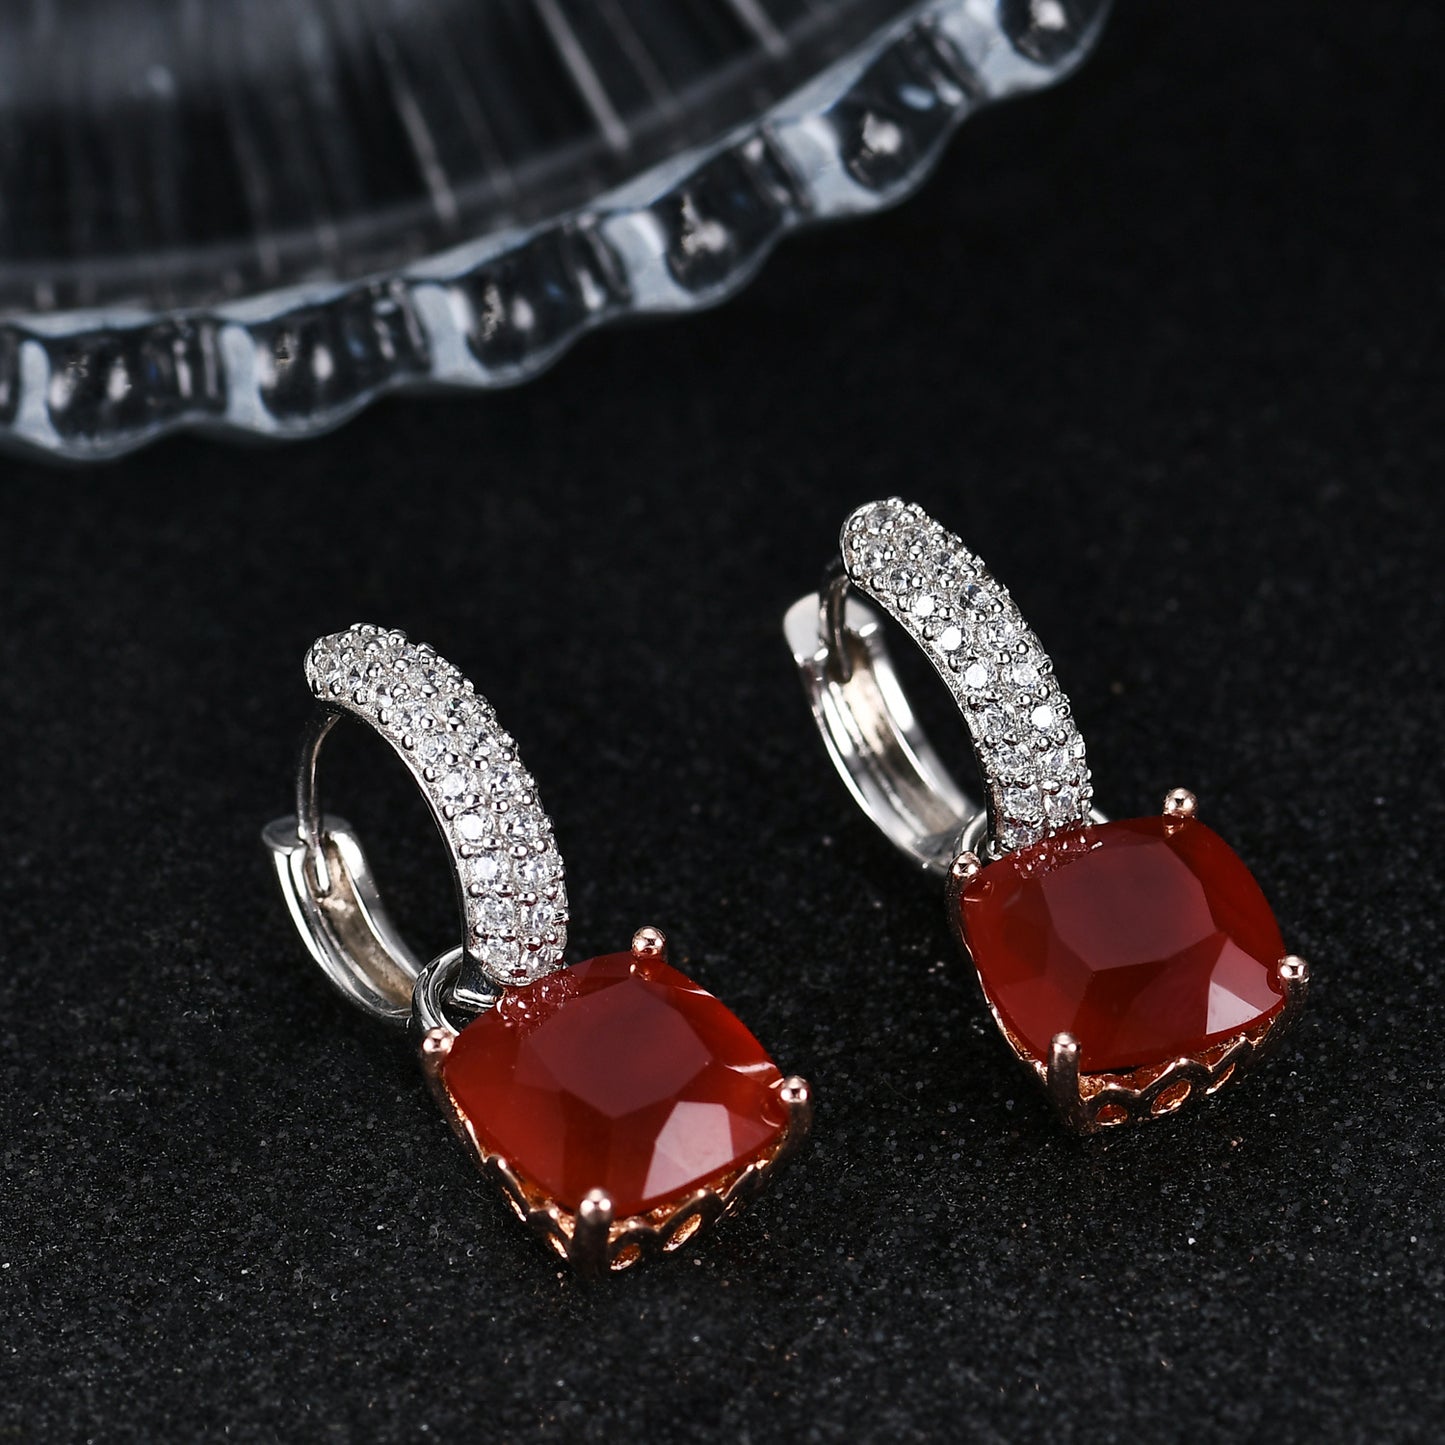 Natural Colourful Gemstone Square Silver Drop Earrings for Women